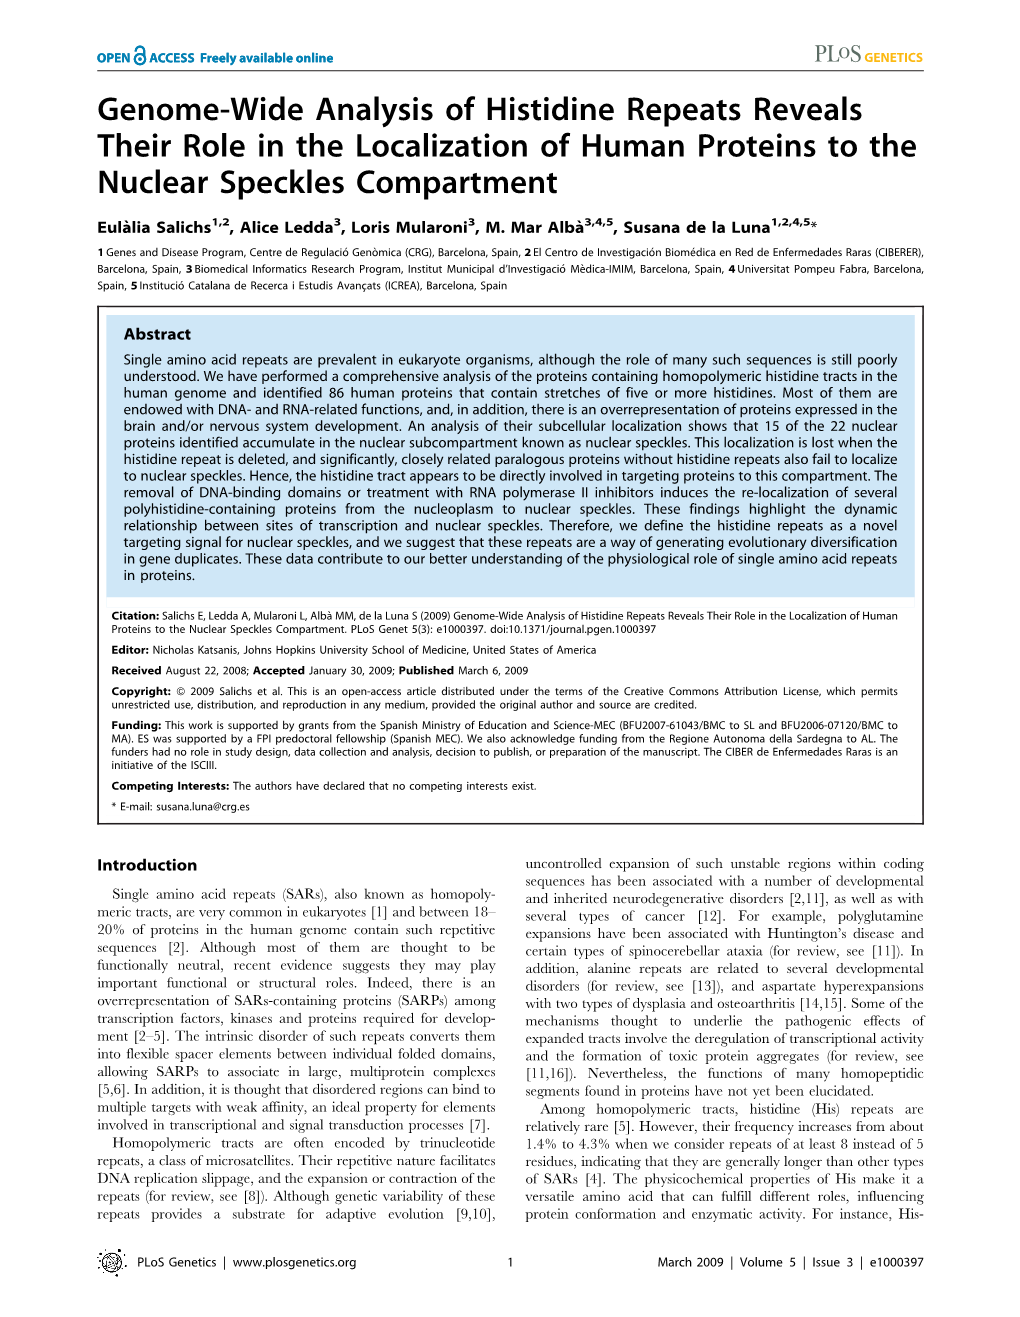 Genome-Wide Analysis of Histidine Repeats Reveals Their Role in the Localization of Human Proteins to the Nuclear Speckles Compartment